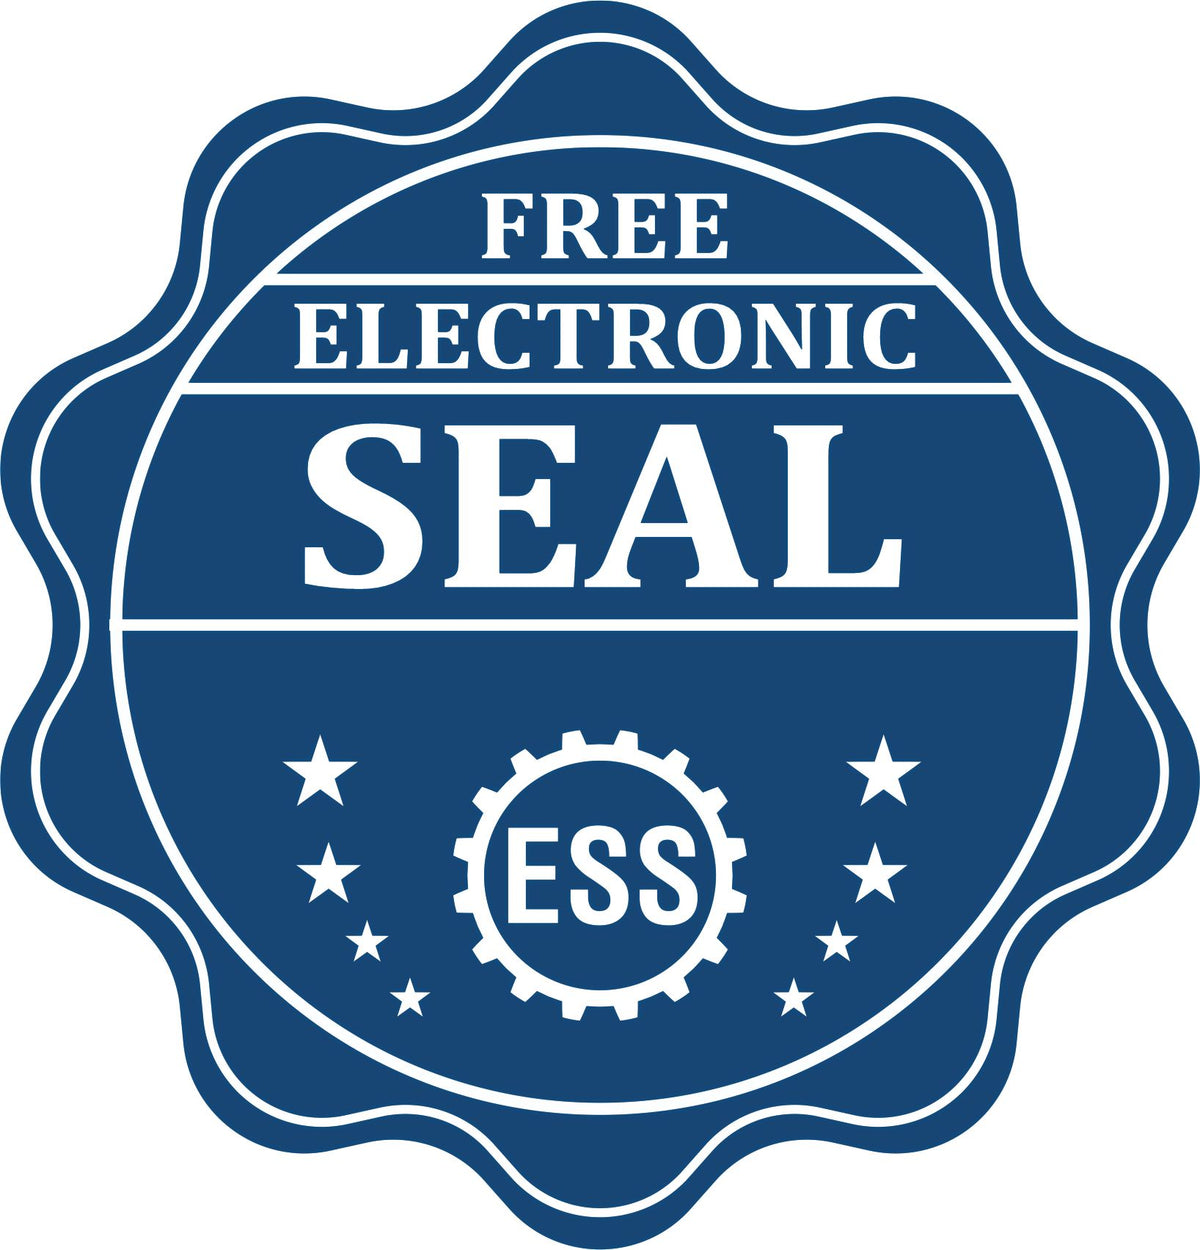 A badge showing a free electronic seal for the State of Wyoming Extended Long Reach Engineer Seal with stars and the ESS gear on the emblem.